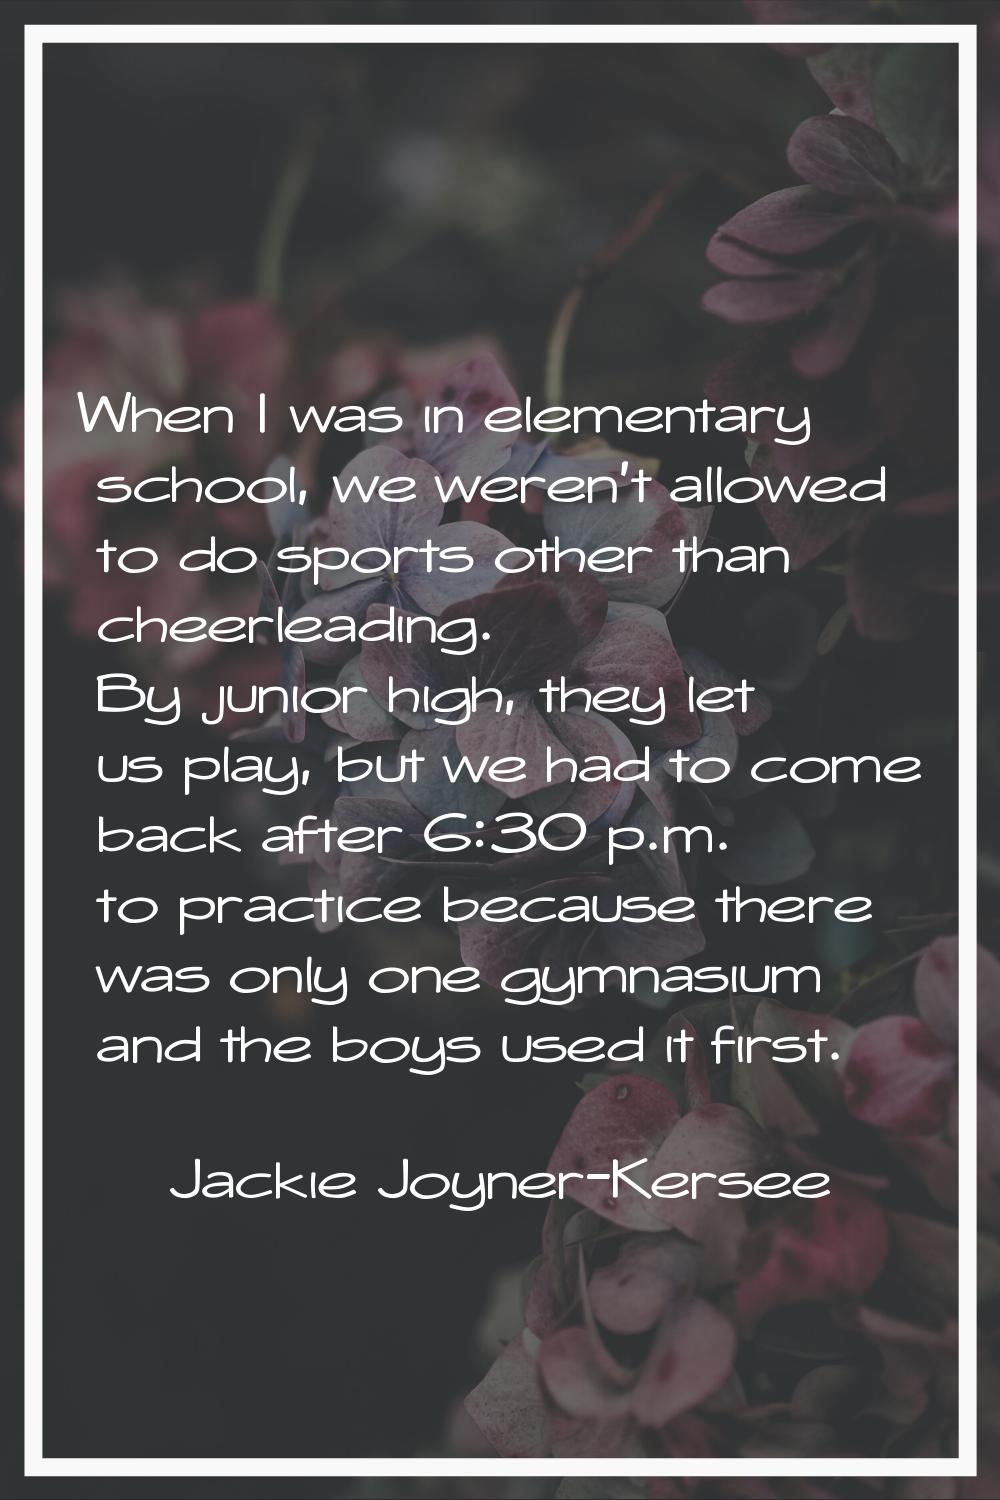 When I was in elementary school, we weren't allowed to do sports other than cheerleading. By junior